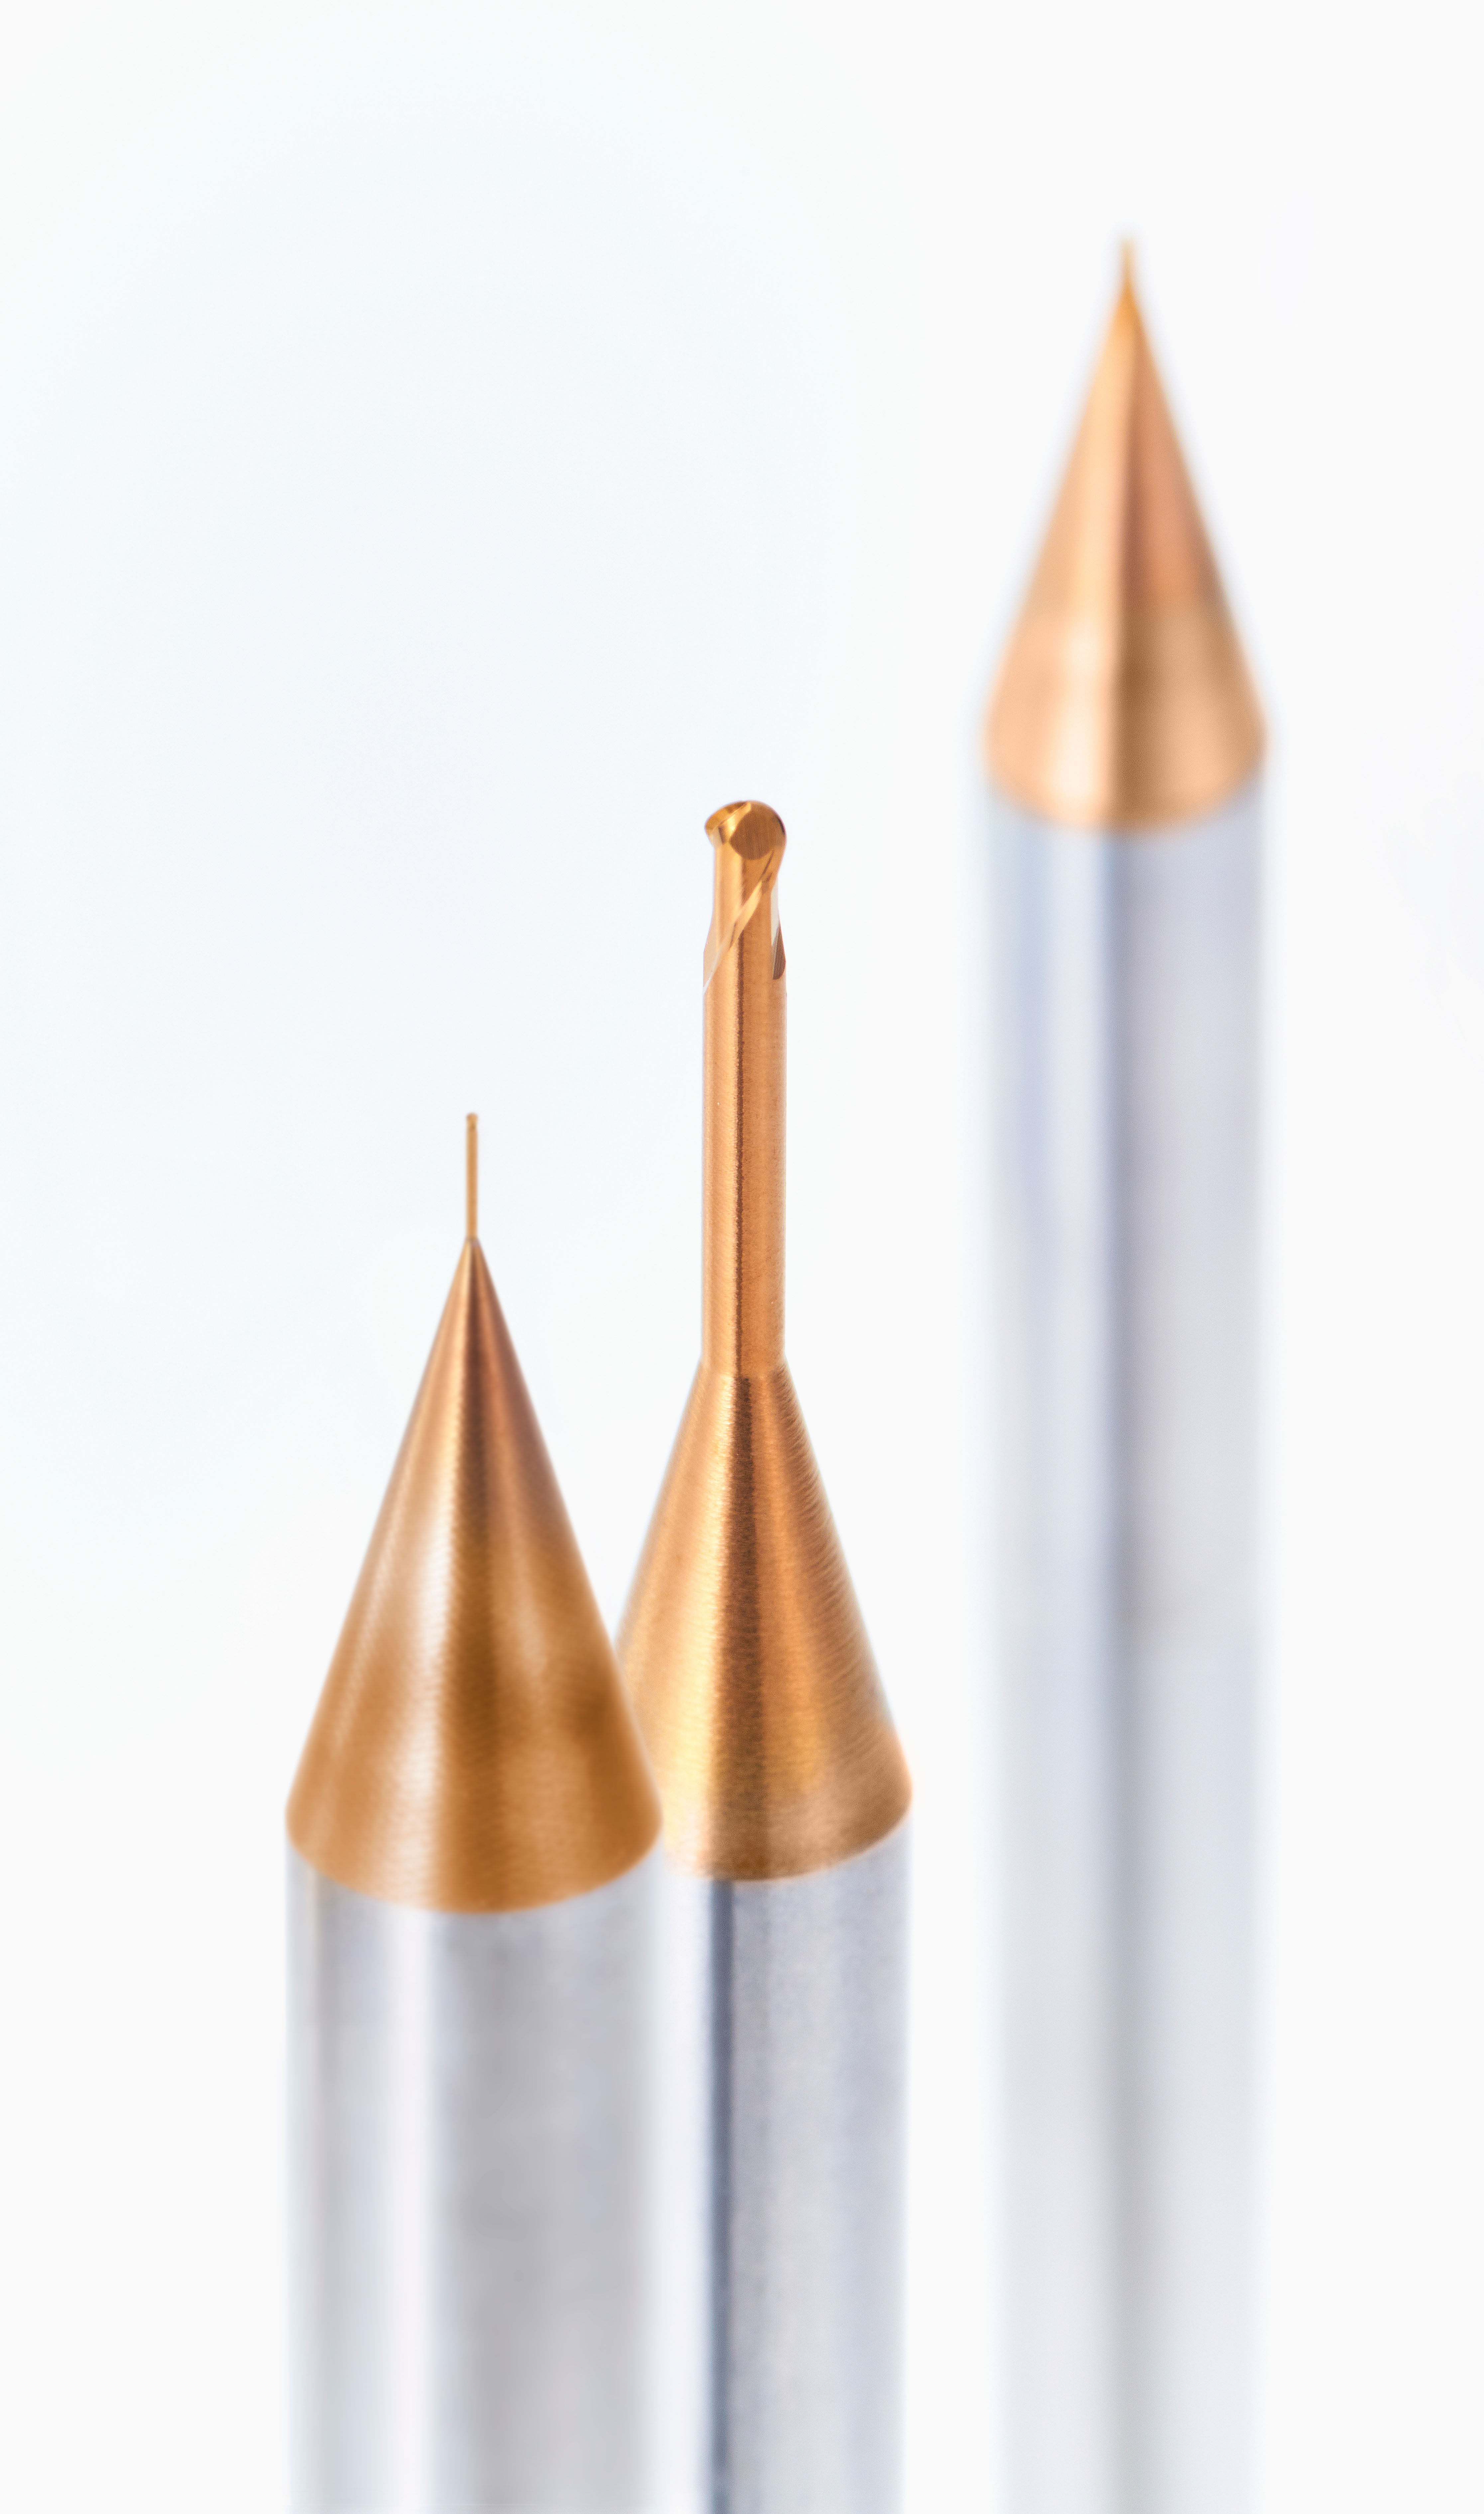 End mills ease hard-part micro-machining